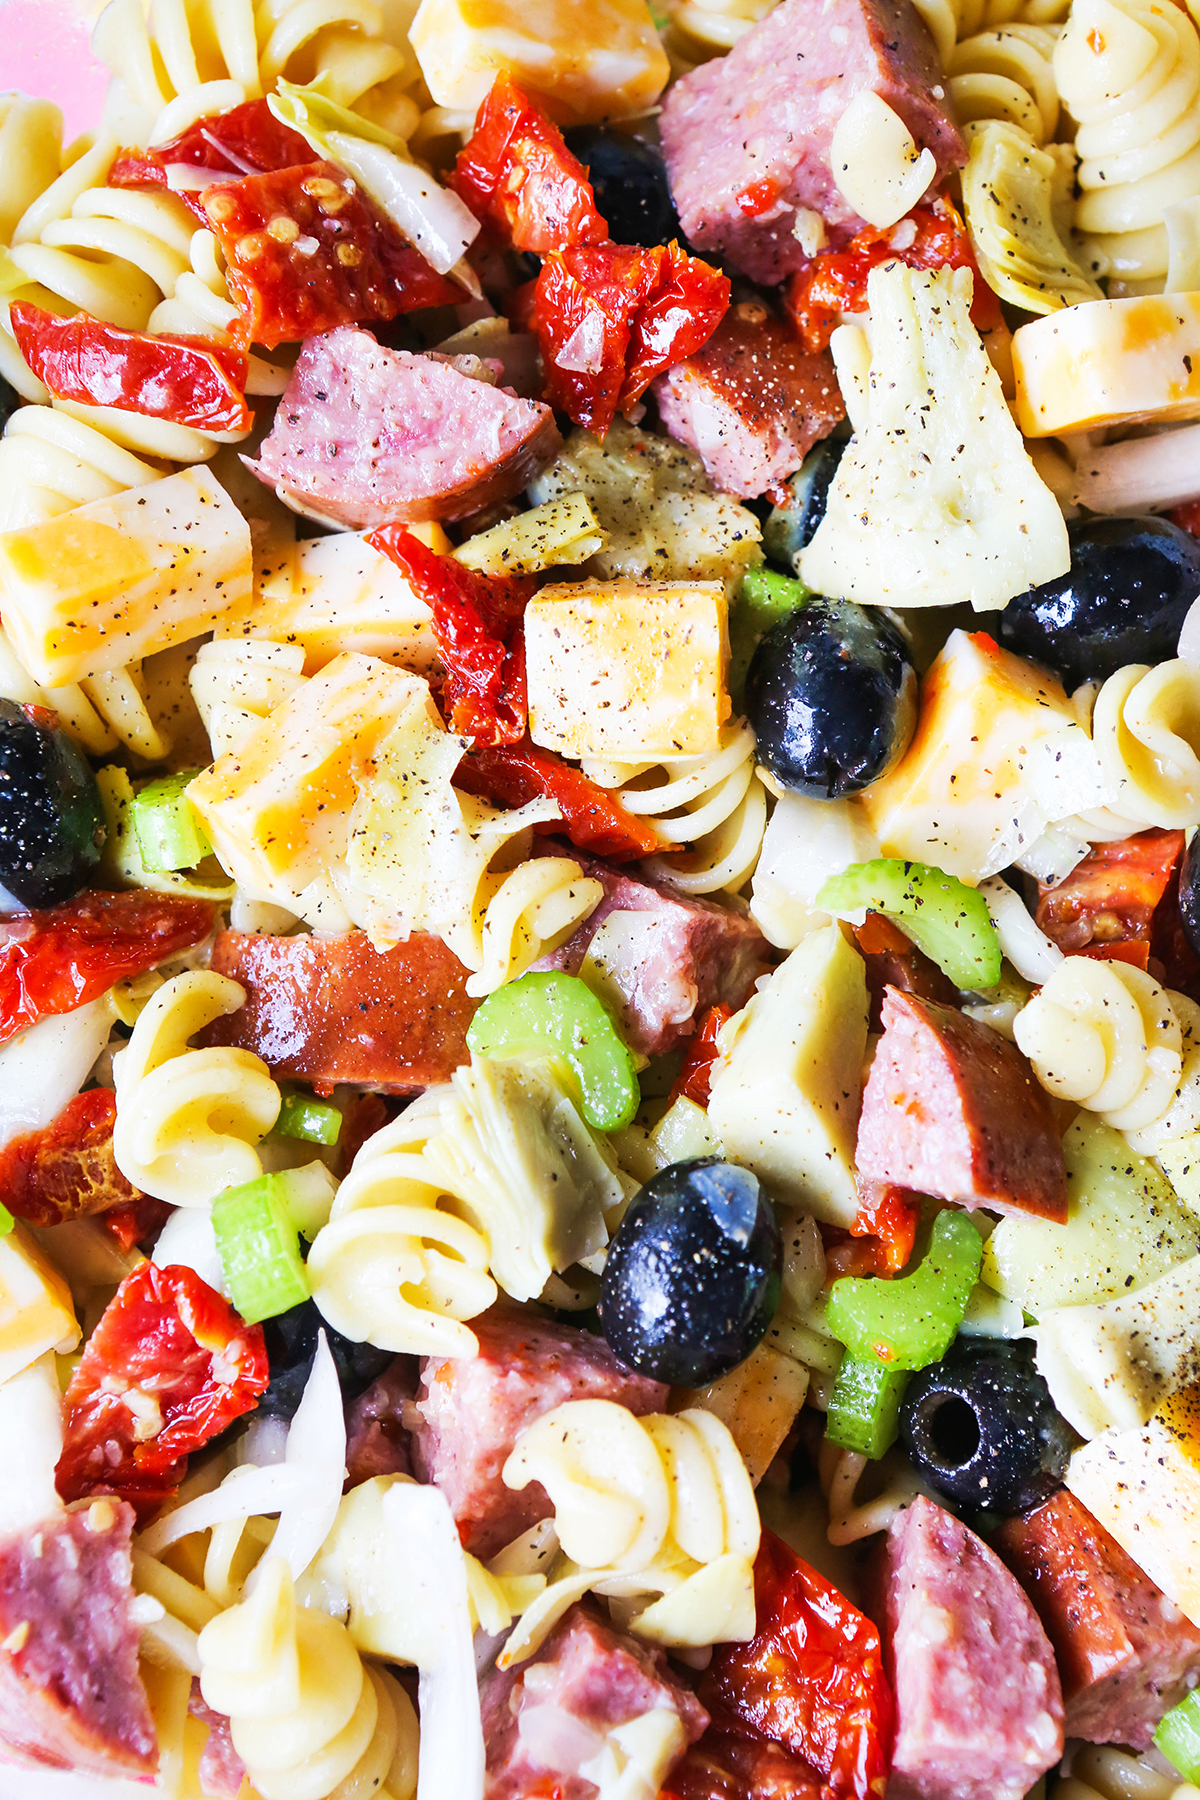 Pasta salad ingredients up close, including black olives, salami, rotini noodles, cheese and tomatoes.